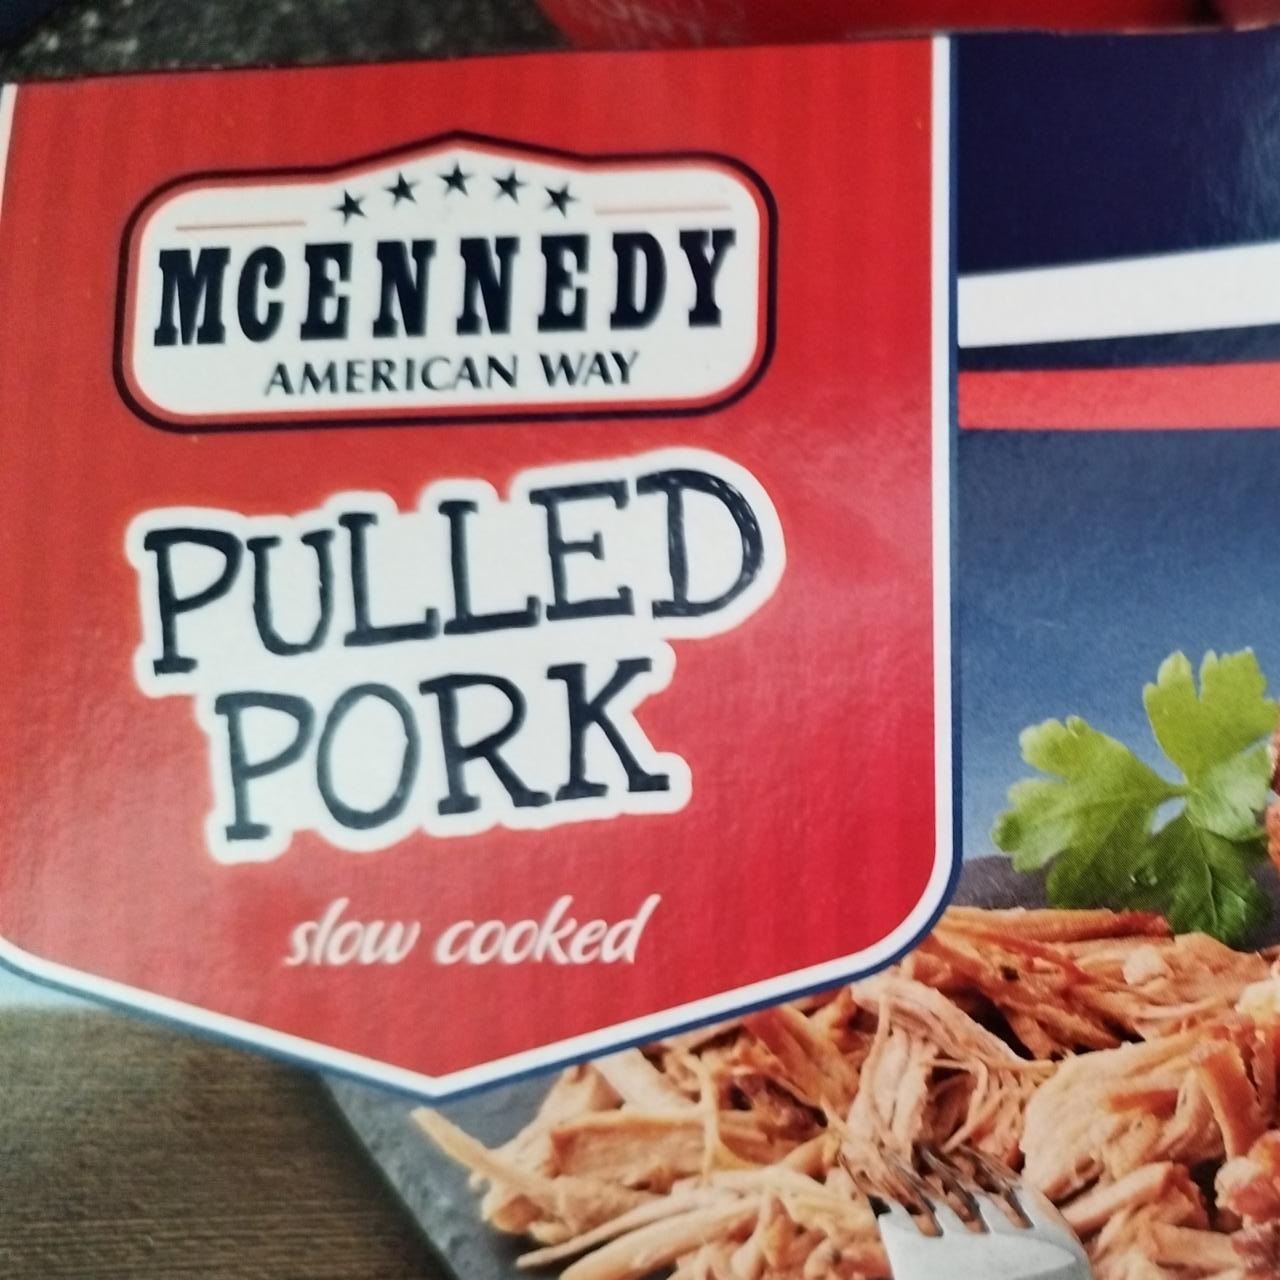 Fotografie - Pulled Pork slow cooked McEnnedy American Way